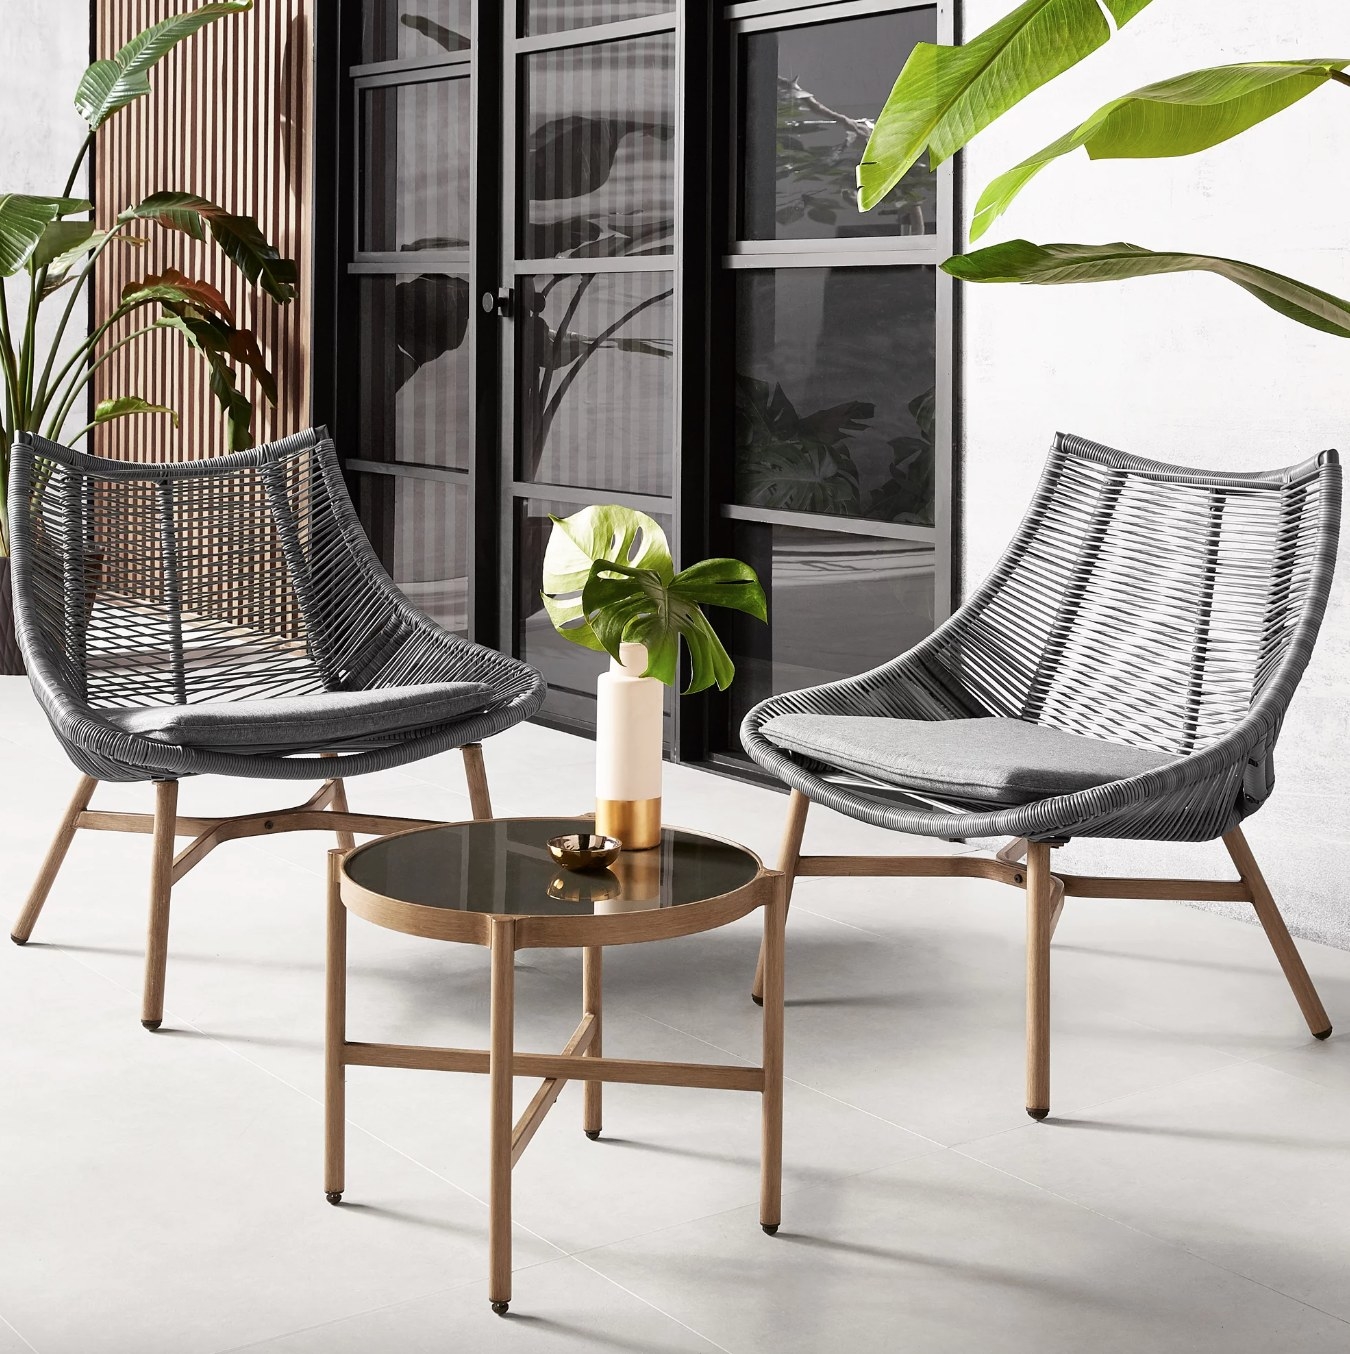 the grey chairs with wooden legs and the glass topped table in a decorated patio space